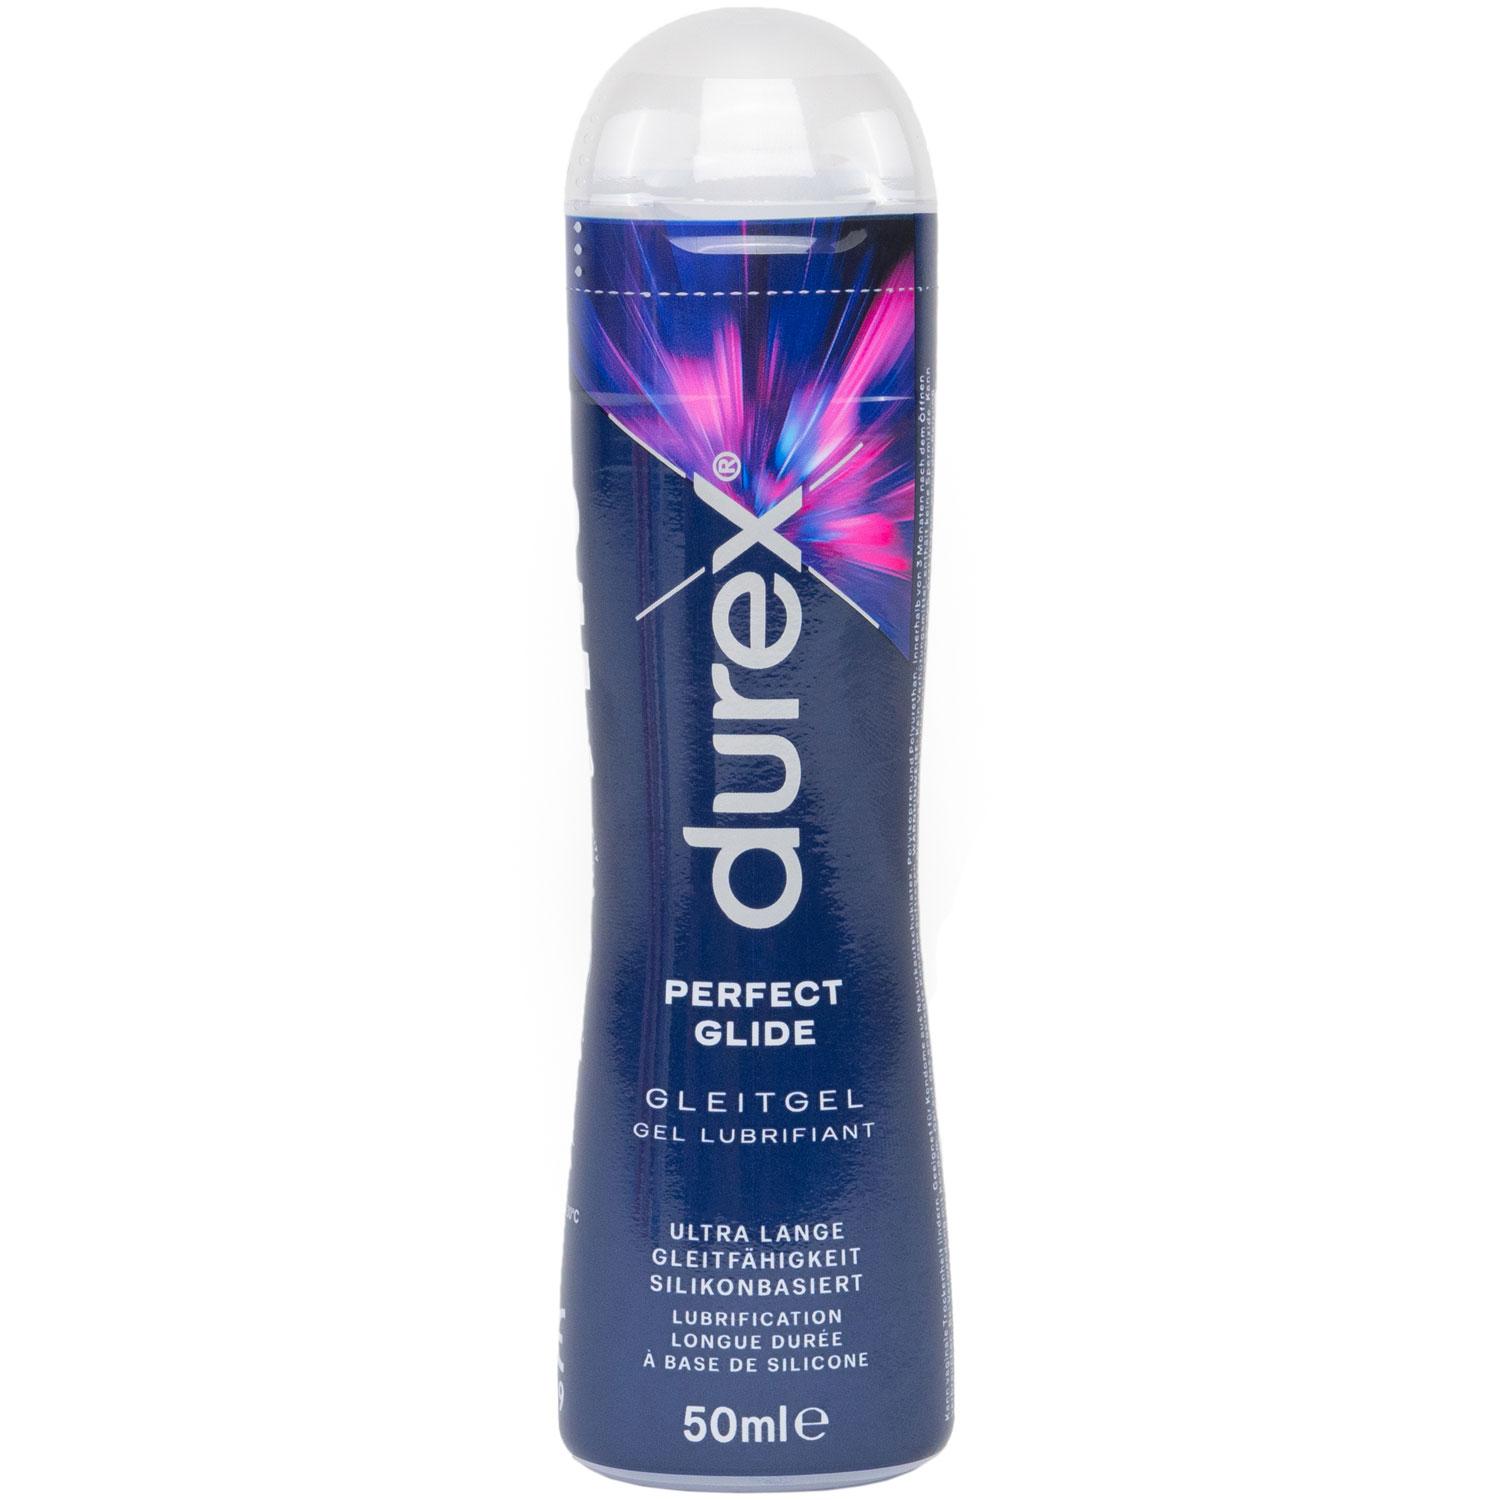 Durex Perfect Glide Lubricant, Silicone Based Anal Sex Lubricant, 50 ml